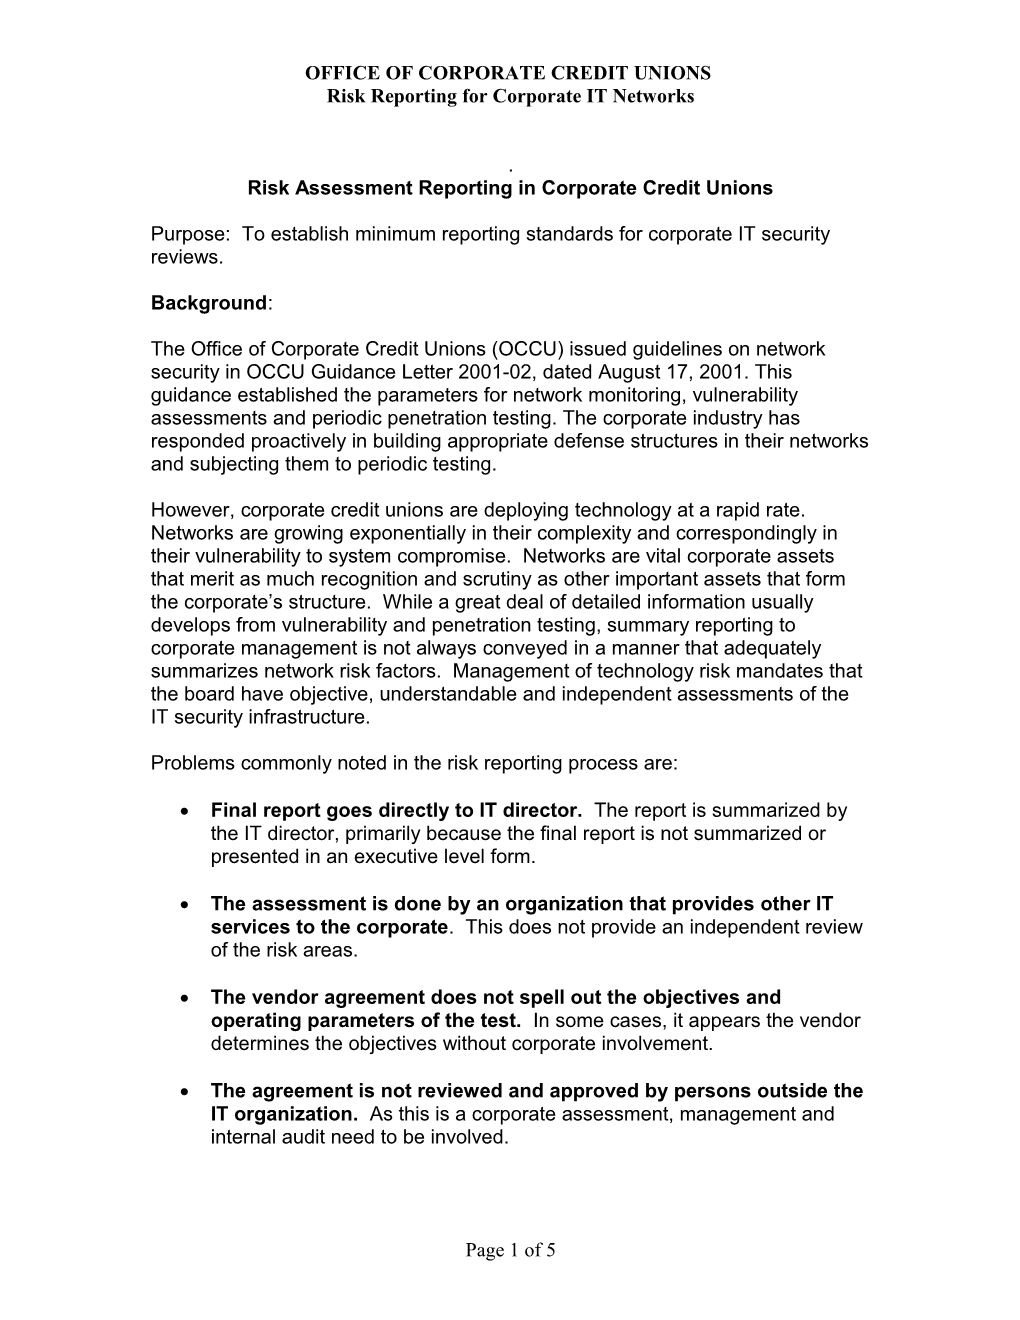 Risk Assessment Reporting in Corporate Credit Unions